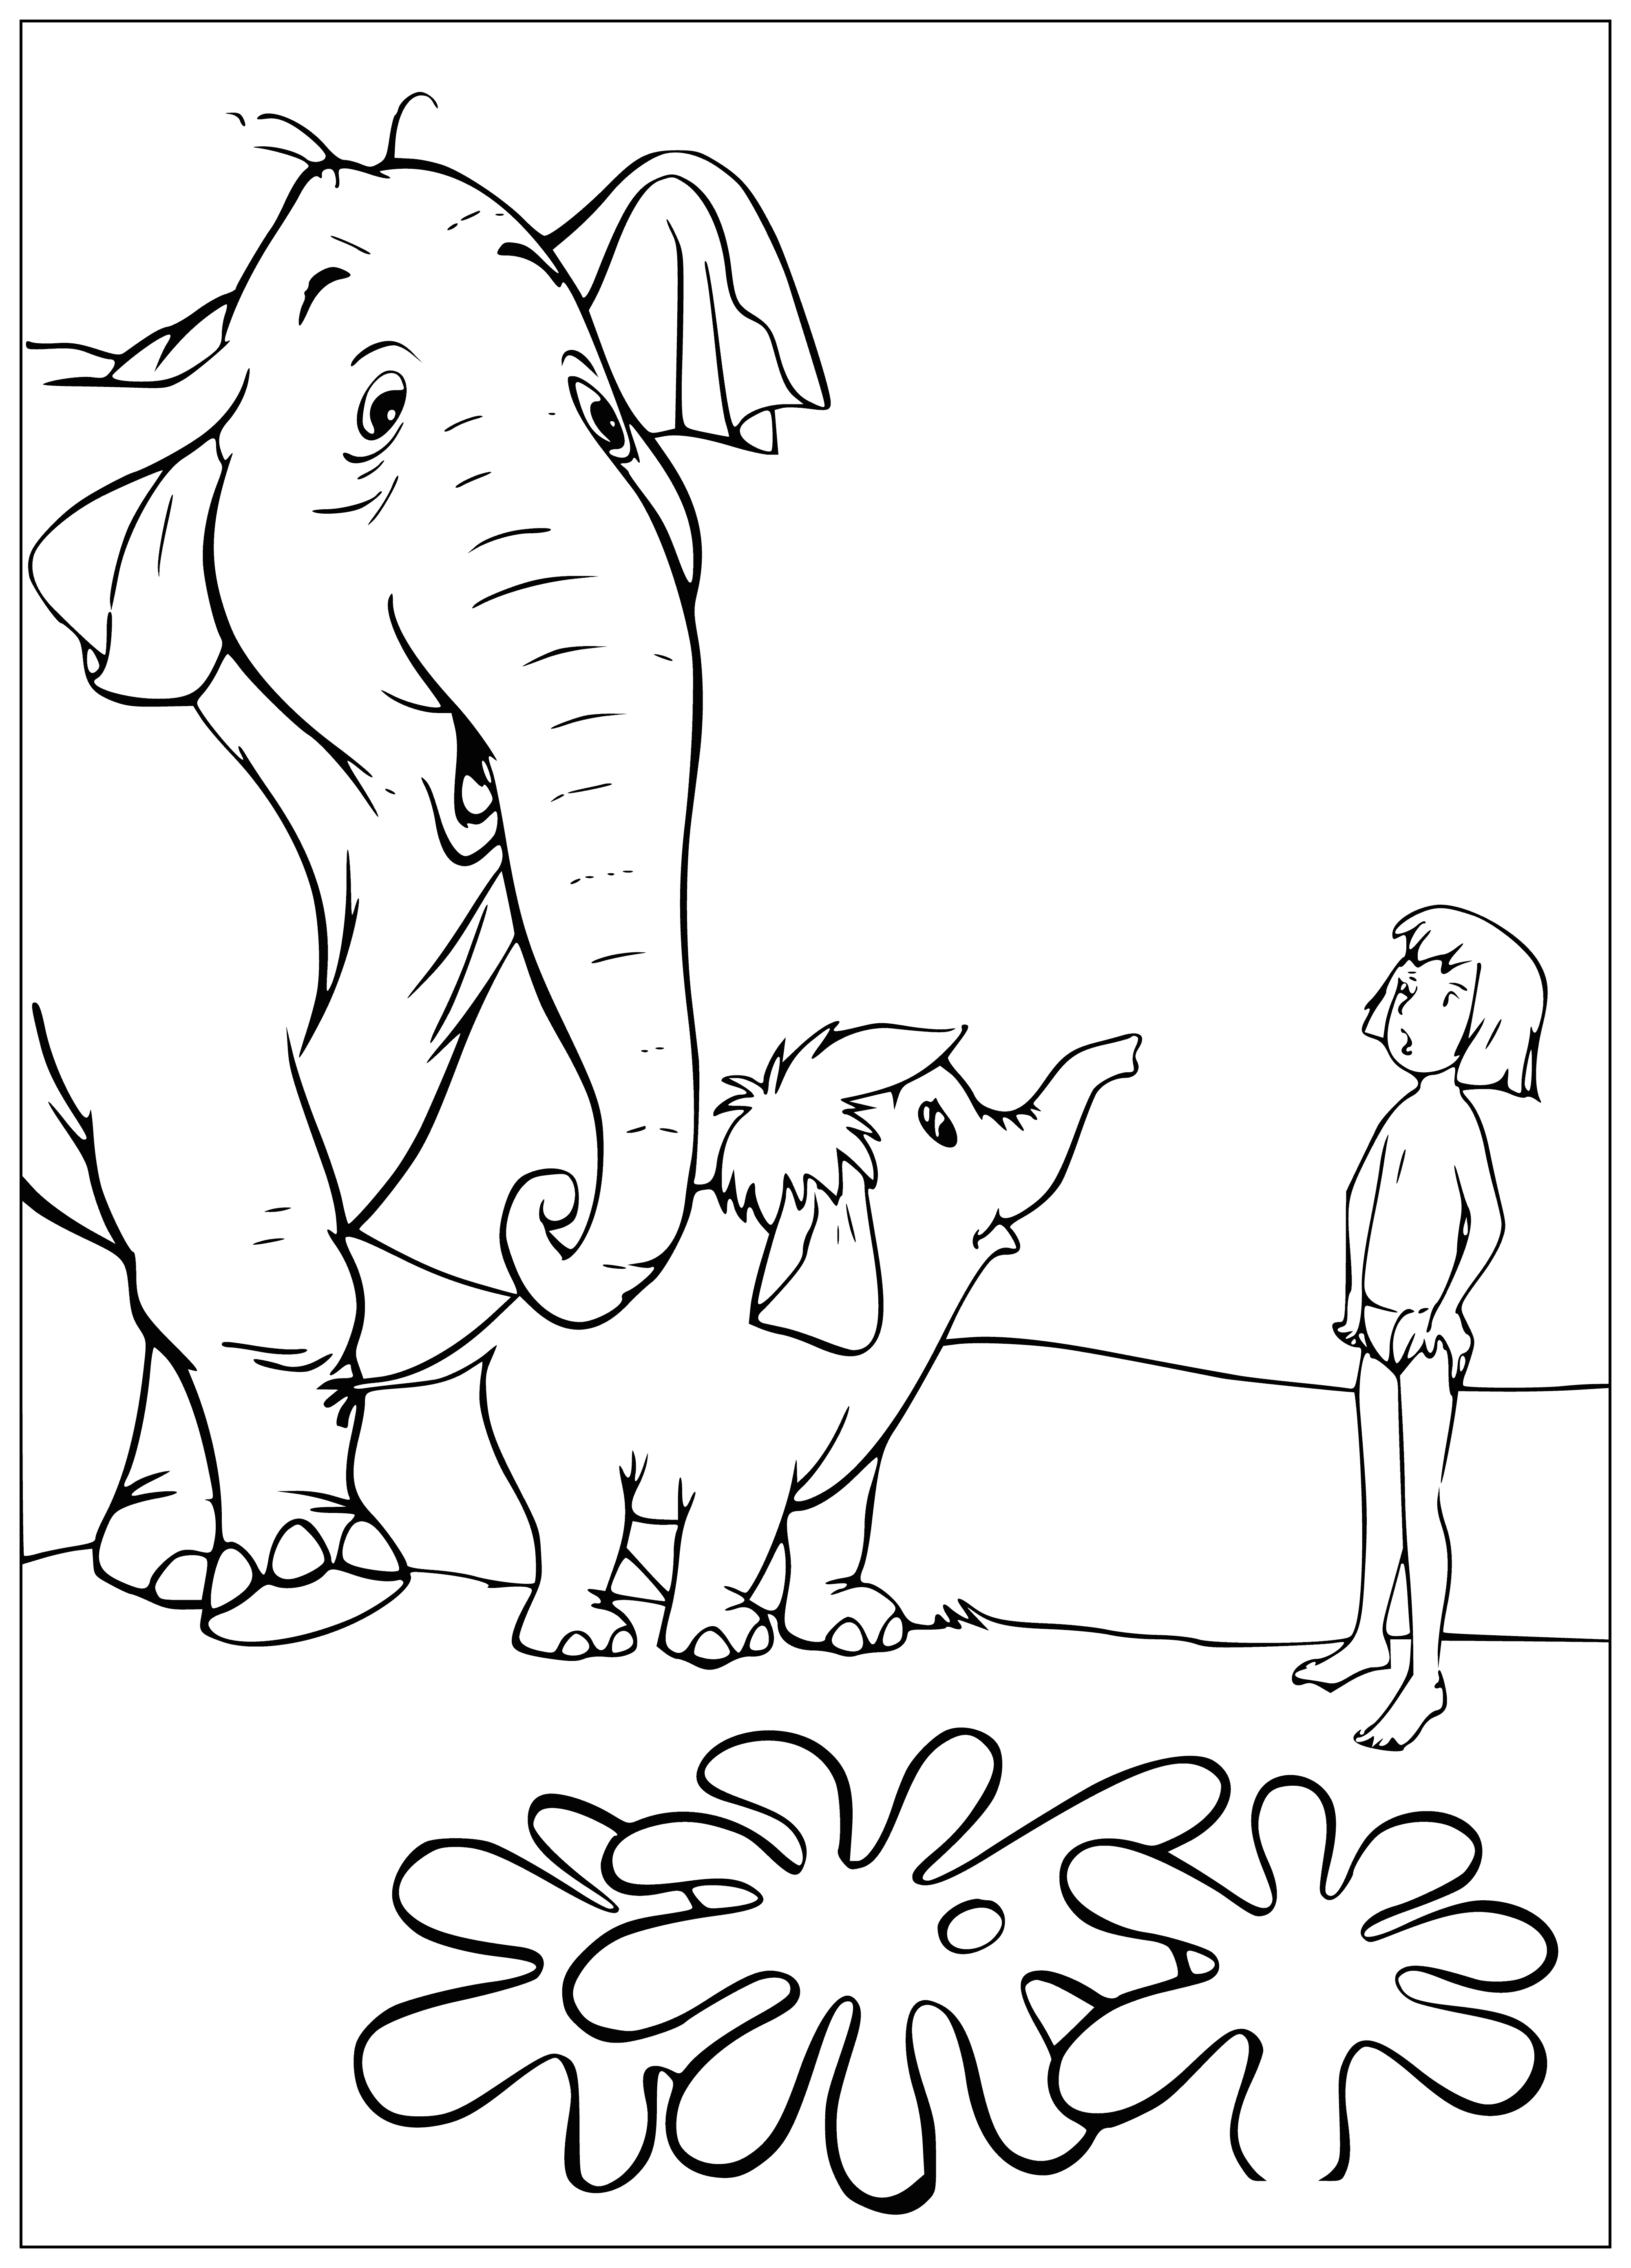 coloring page: Mowgli and baby elephant sit together, ele pink w/ white belly, Mowgli brown skin, black hair, loincloth, knife in right hand.